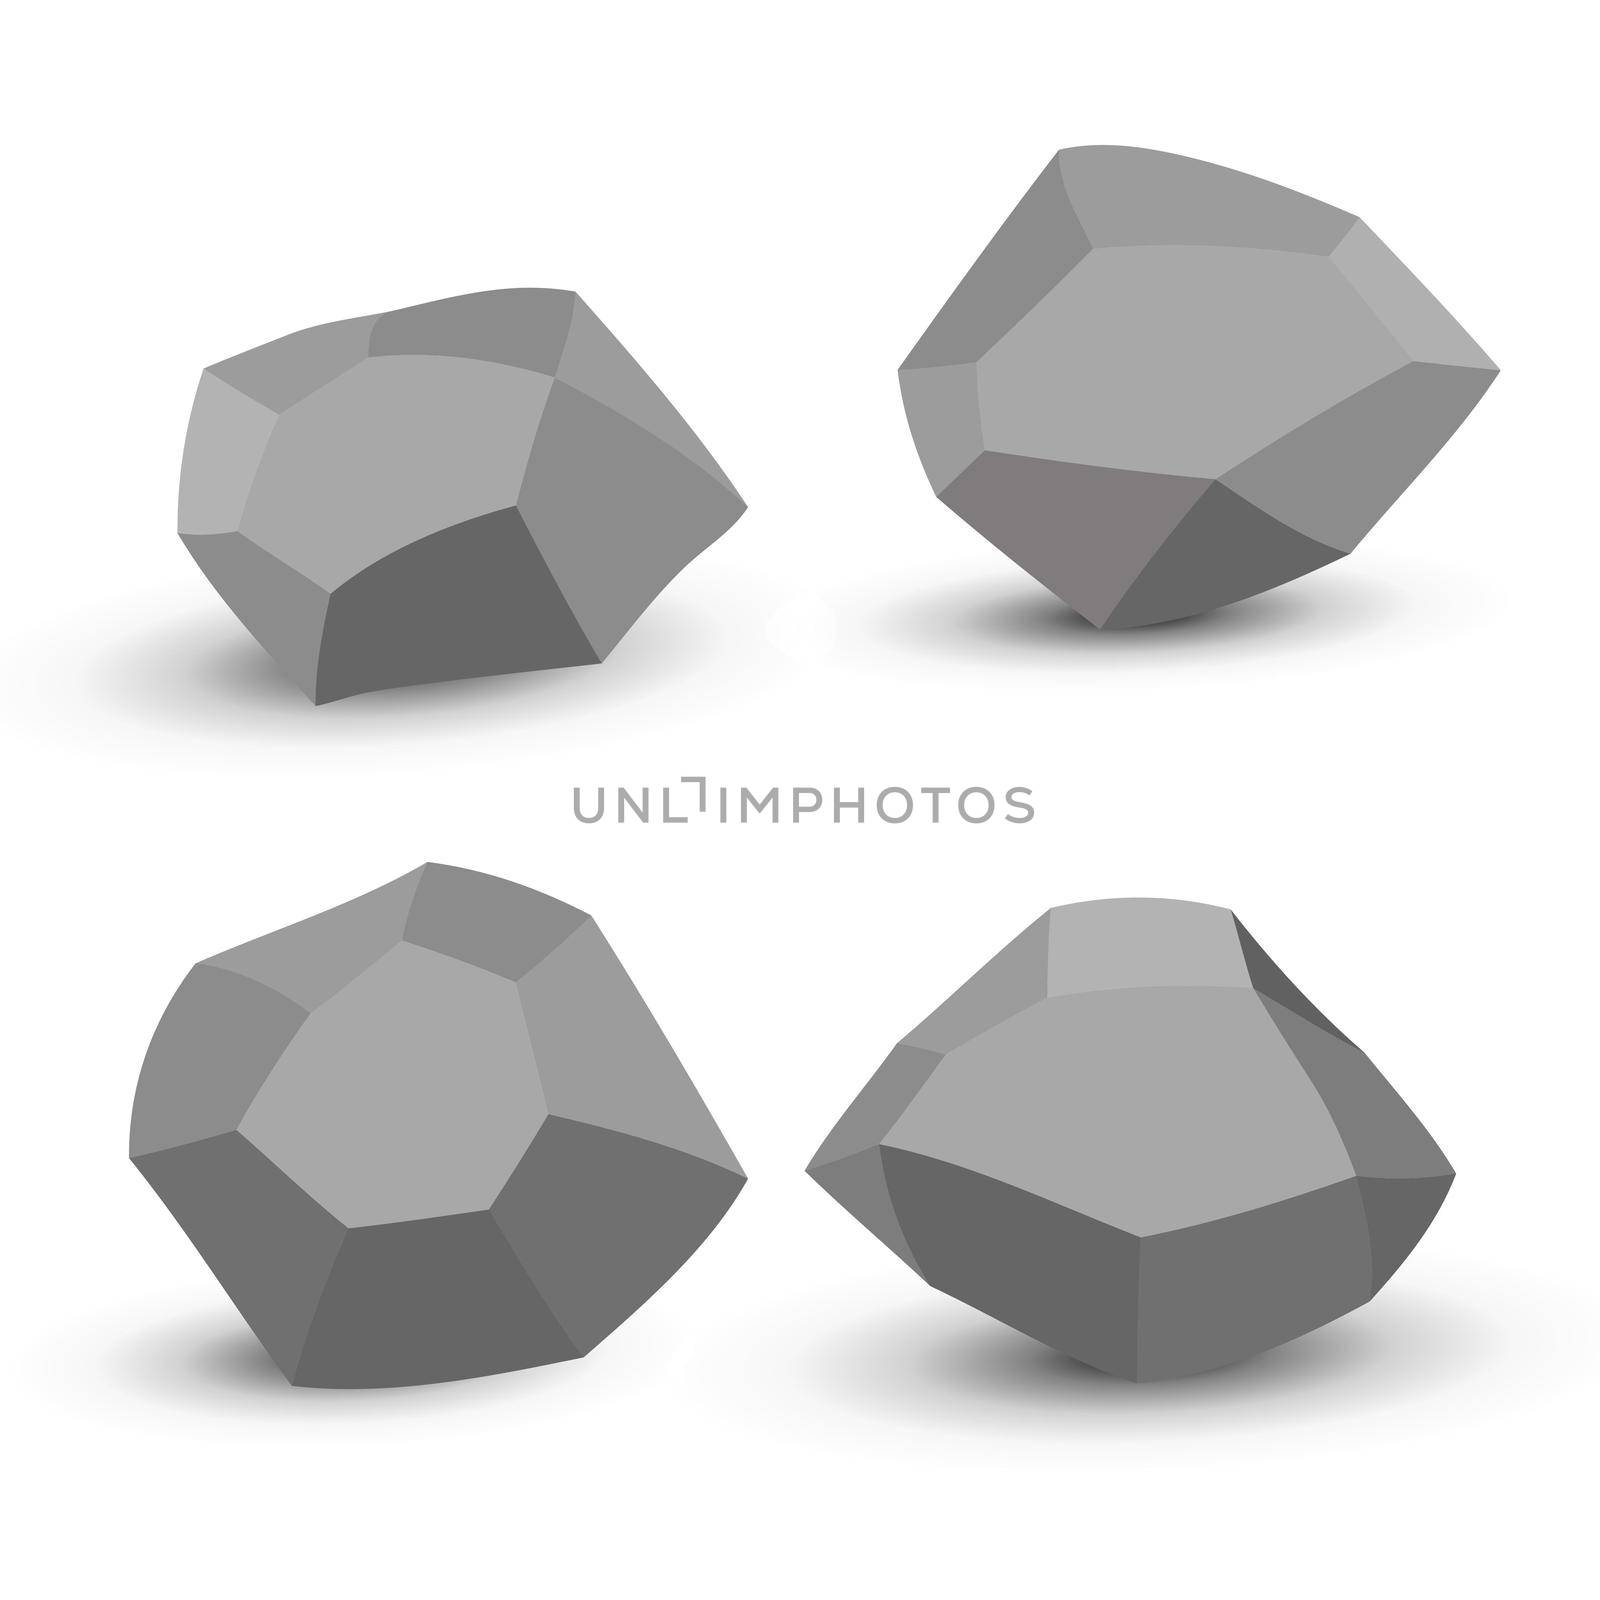 Cartoon stones. Rock stone isometric set. Granite grey boulders, natural building block shapes, wall stones. 3d flat isolated illustration. Vector collection